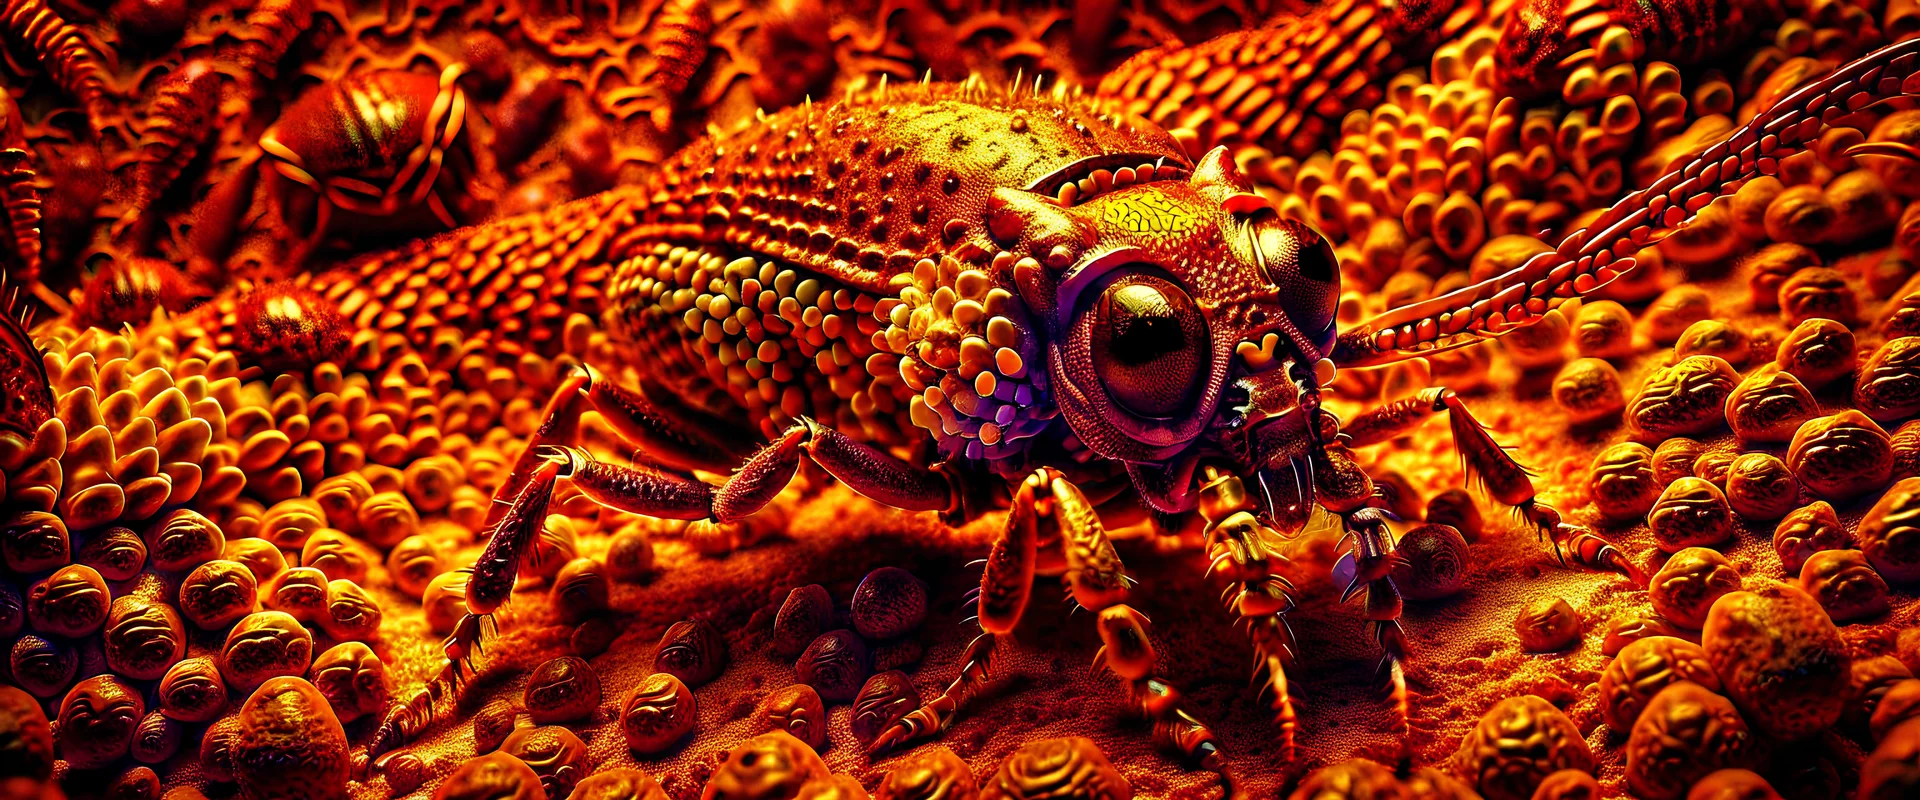 A national geographic award skin color patterned like a poisinous incect or reptile, horrorcore, science gone crazy, winning photograph of of a bat spider housefly station wagon hybrid in nature and on the hunt, 64k, reds, oranges, and yellows anatomically correct, 3d, organic surrealism, dystopian, photorealisitc, realtime, symmetrical, clean, 4 small compound eyes around two larger compound eyes, surrealism telephoto dynamic lighting 64 megapixels Unreal Engine volumetric lighting VRay